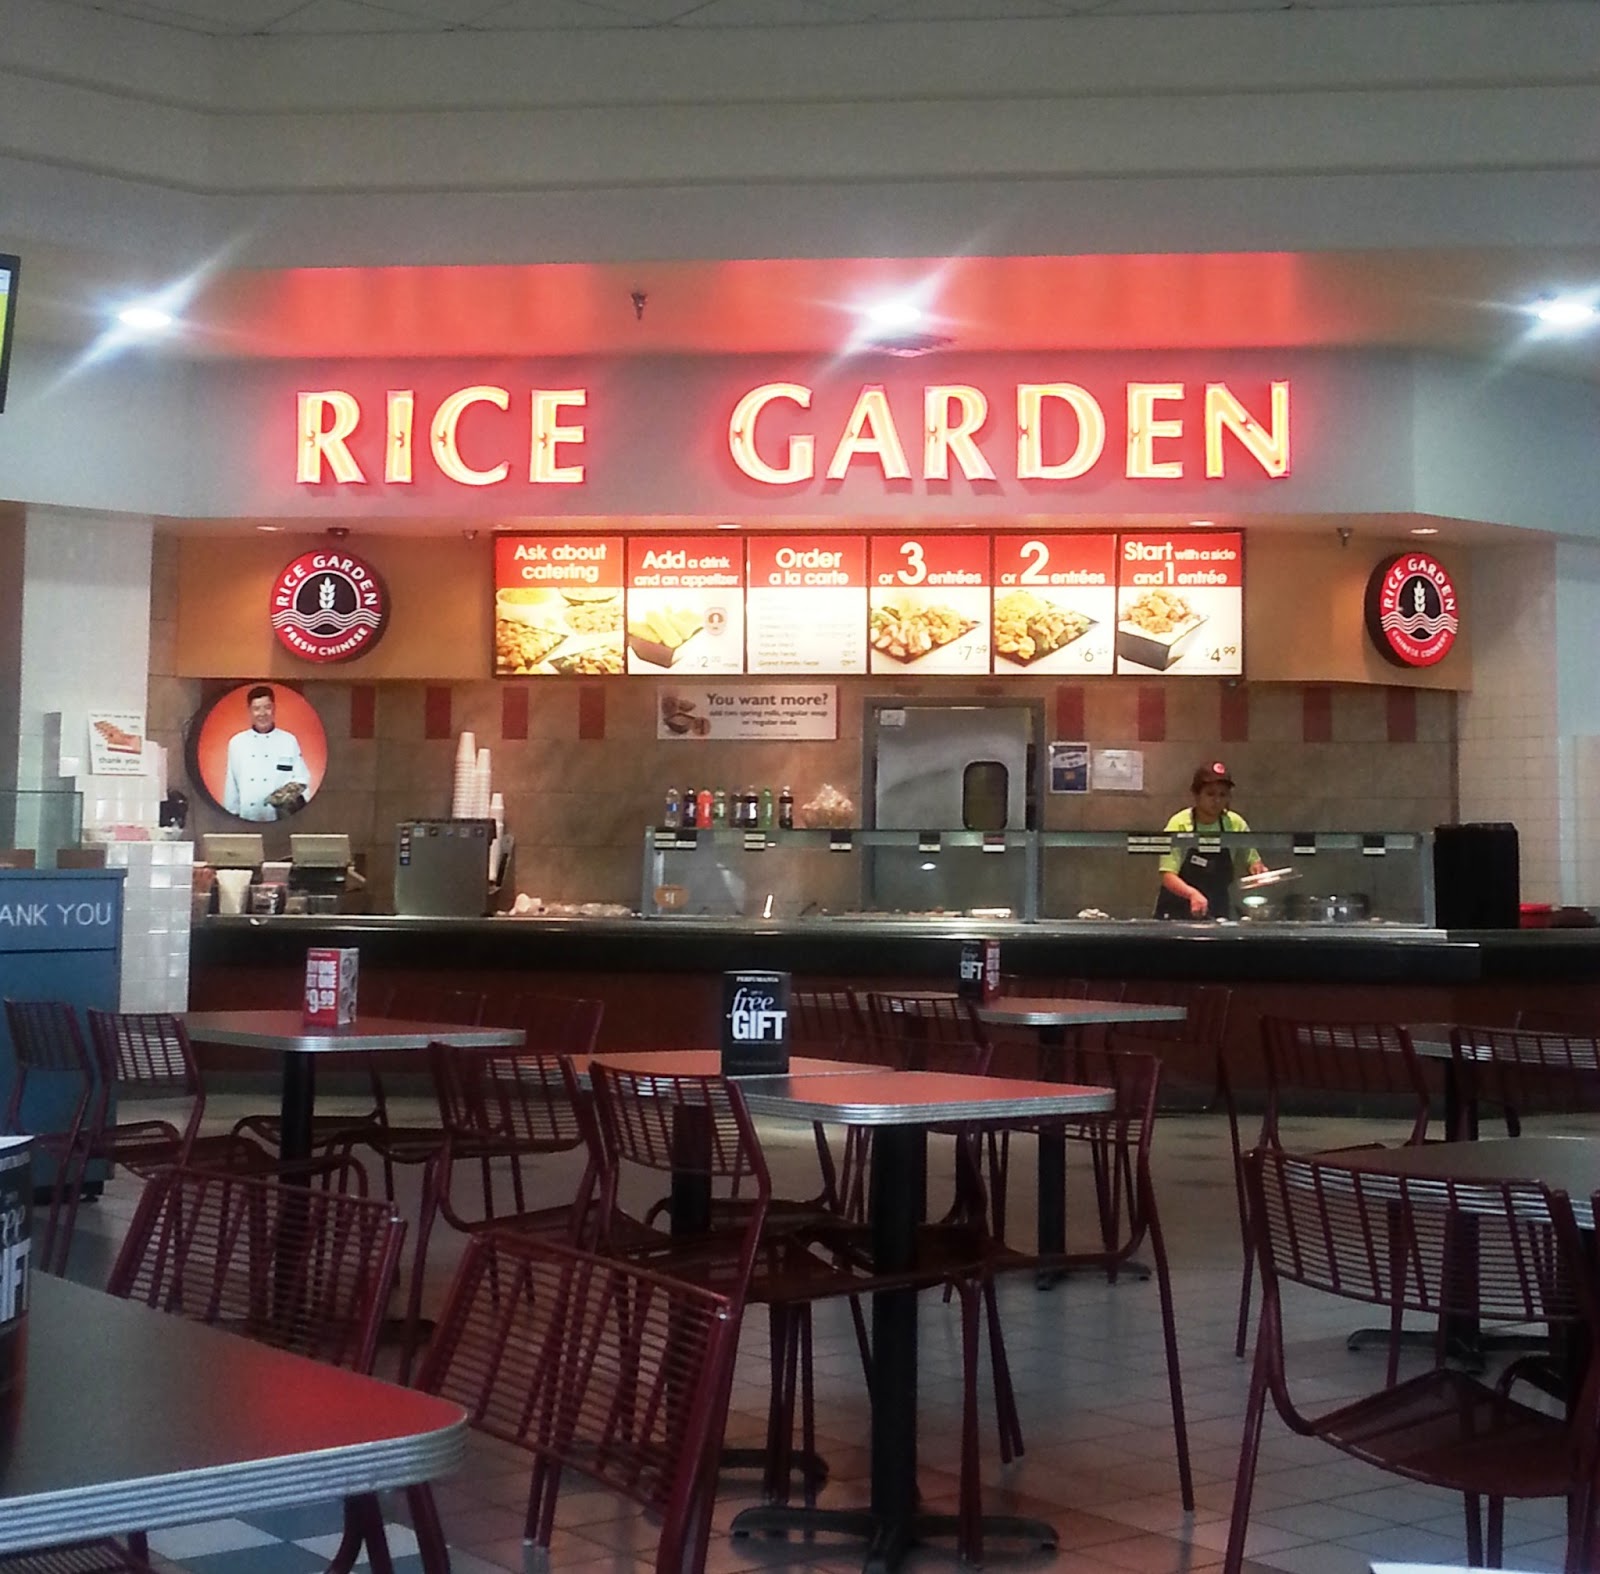 Laughlin Buzz: A visit to the Food Court at the Laughlin Mall